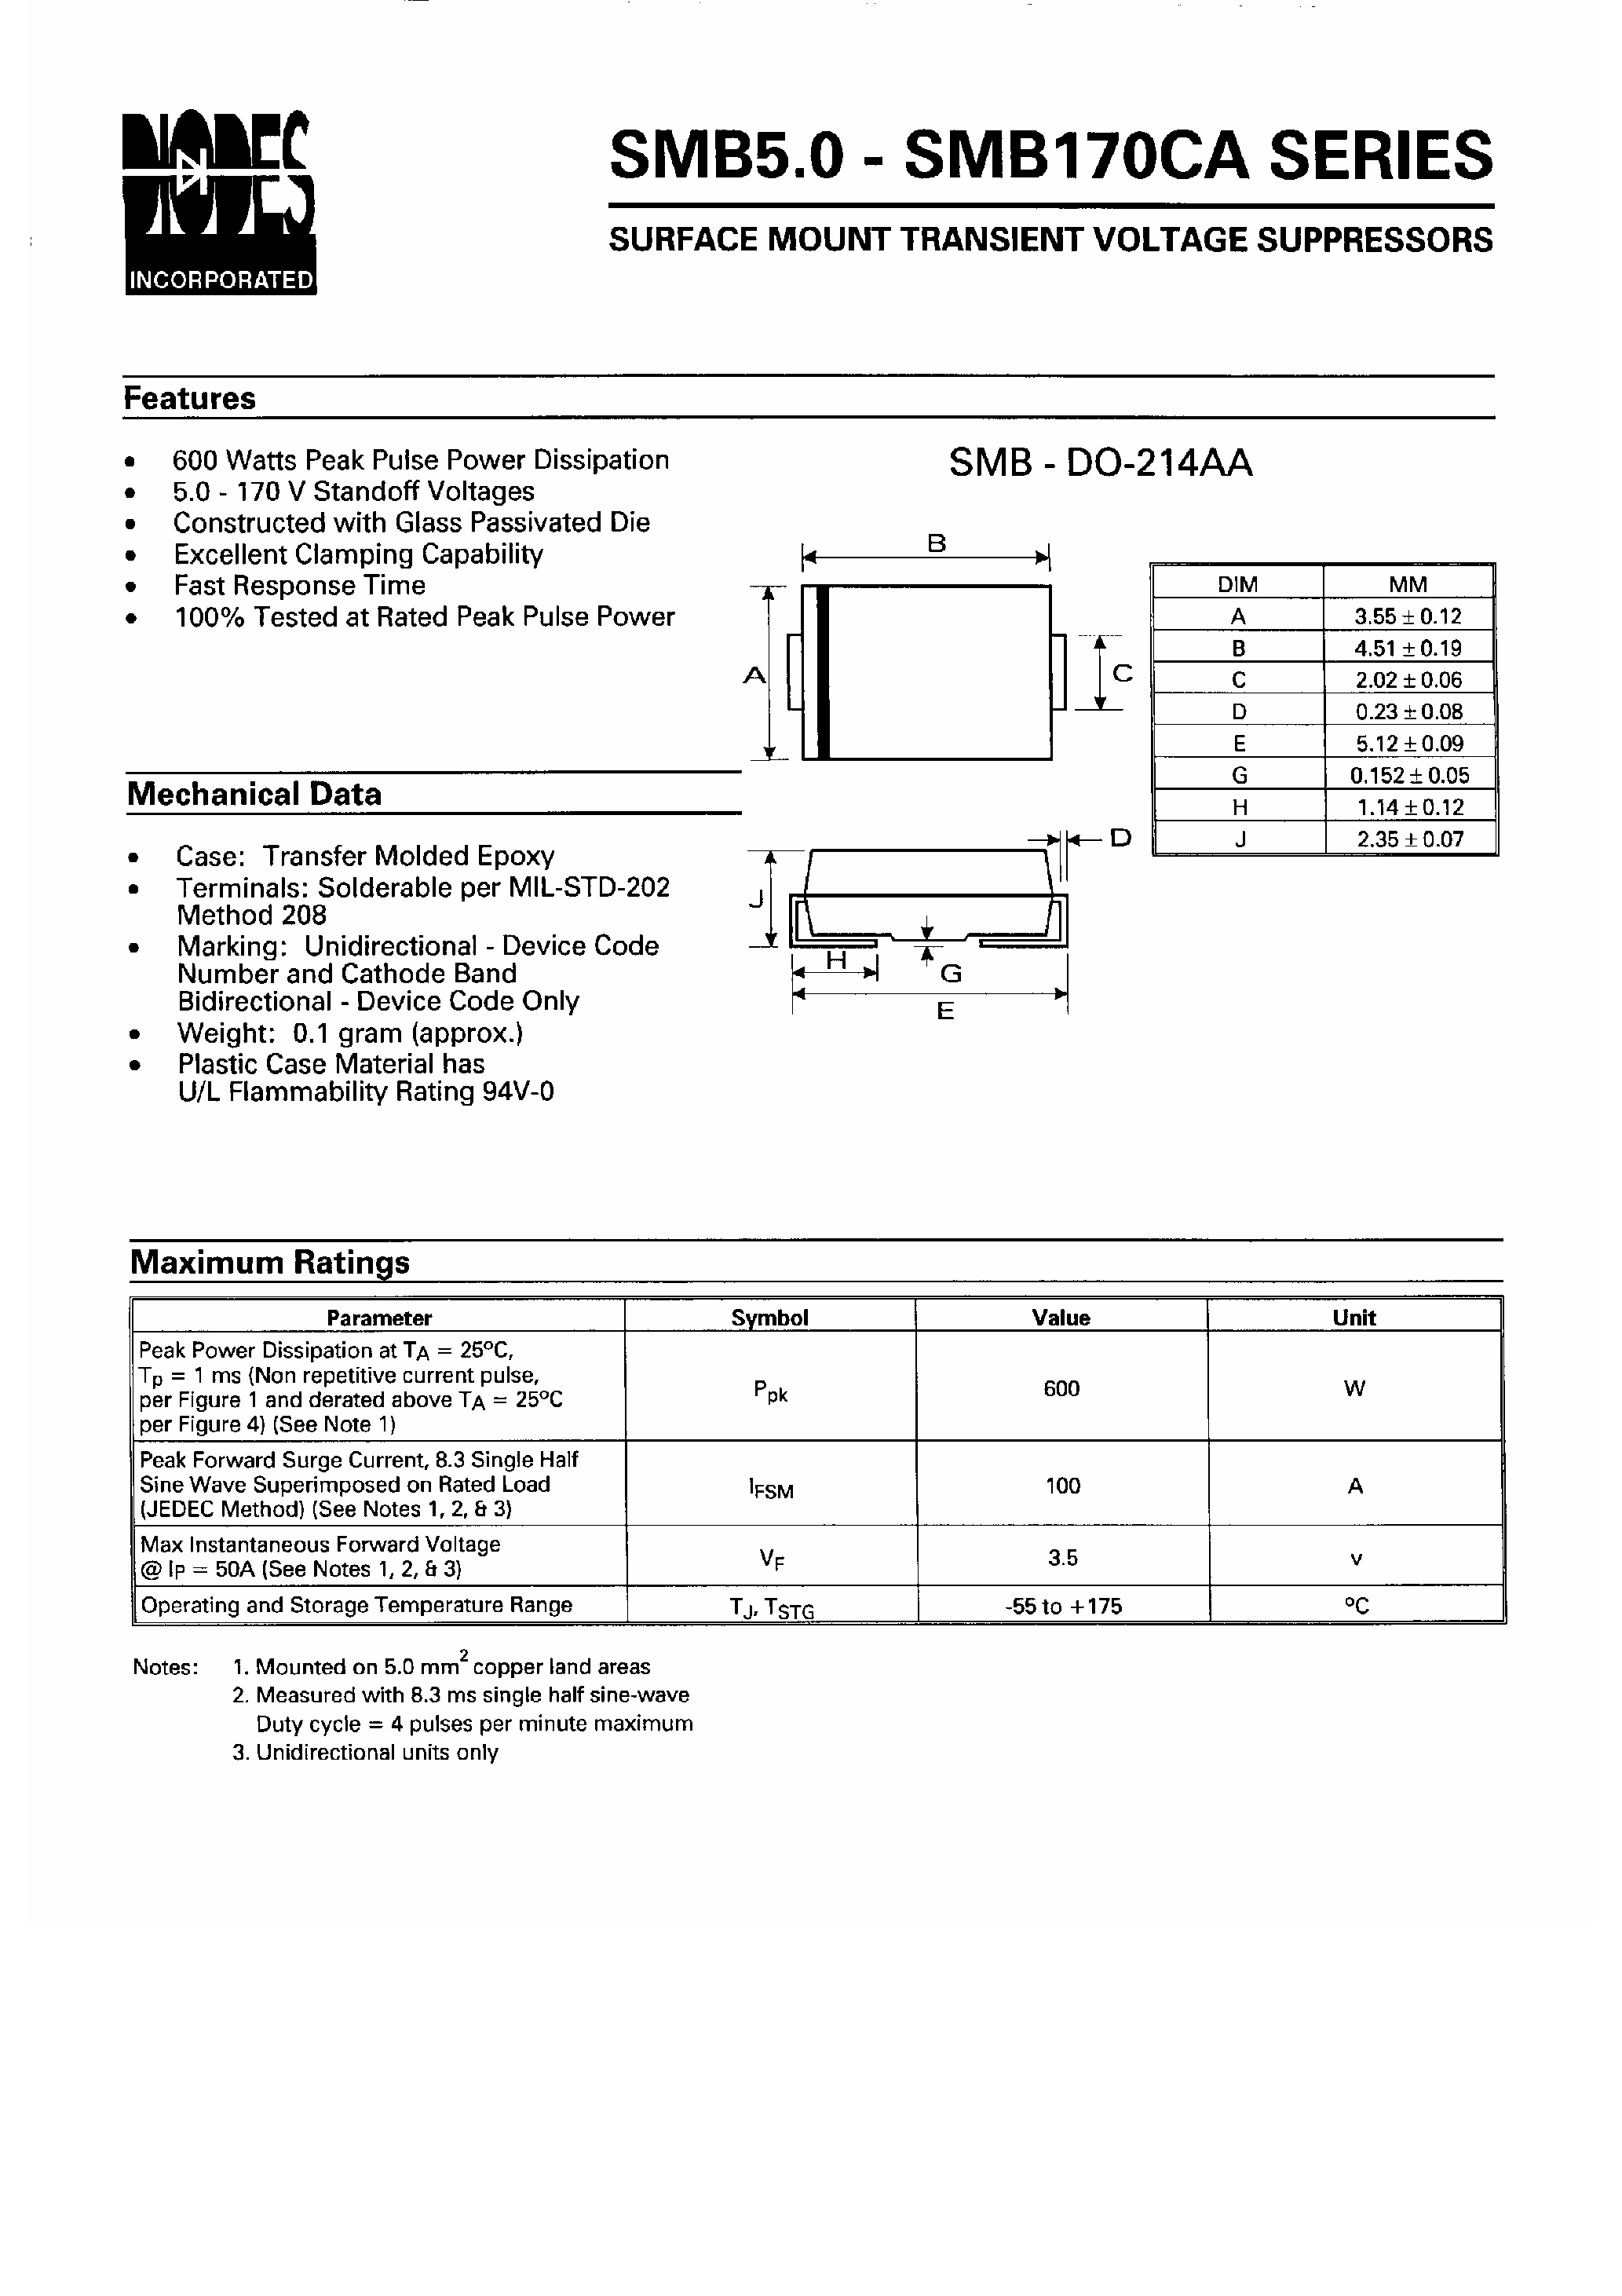 Datasheet SMB160 - Surface Mount Transient Voltage Suppressors page 1